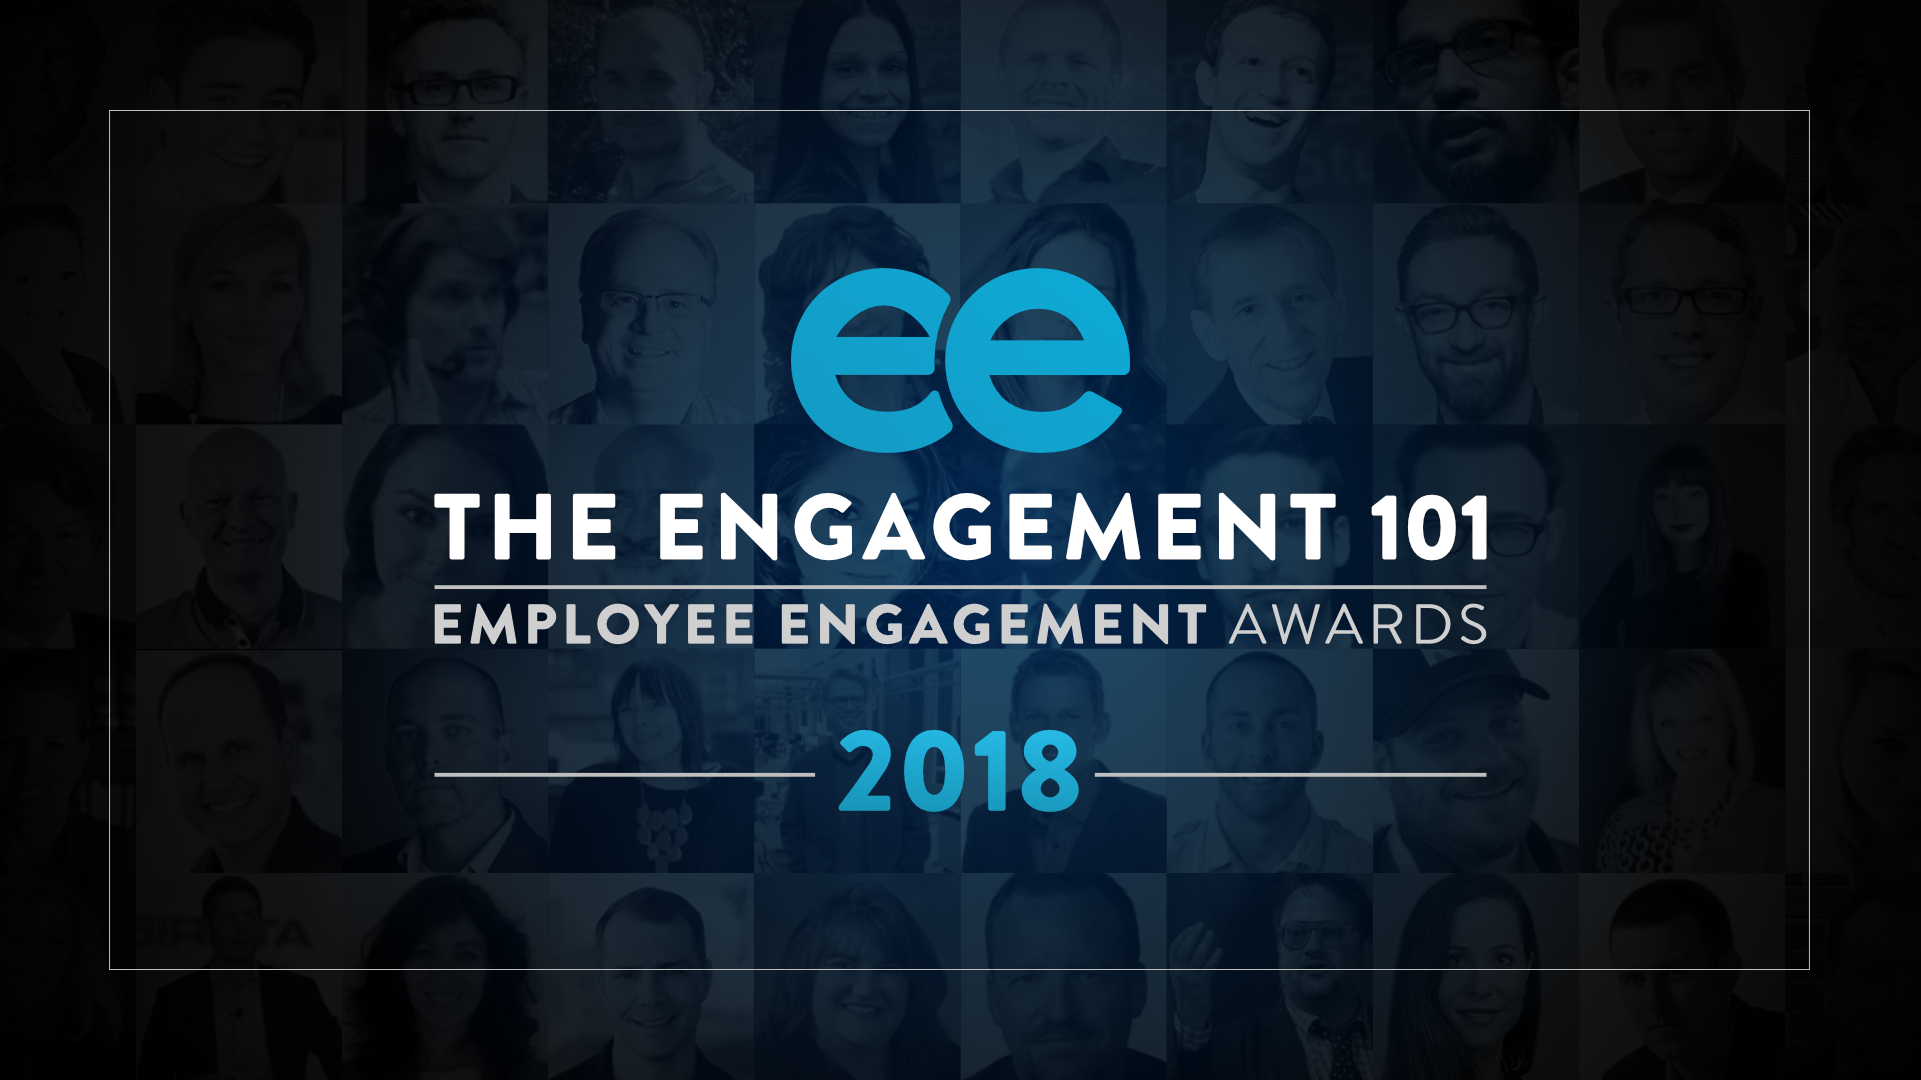 The Employee Engagement Awards Announces the complete 2018 #Engagement101 list